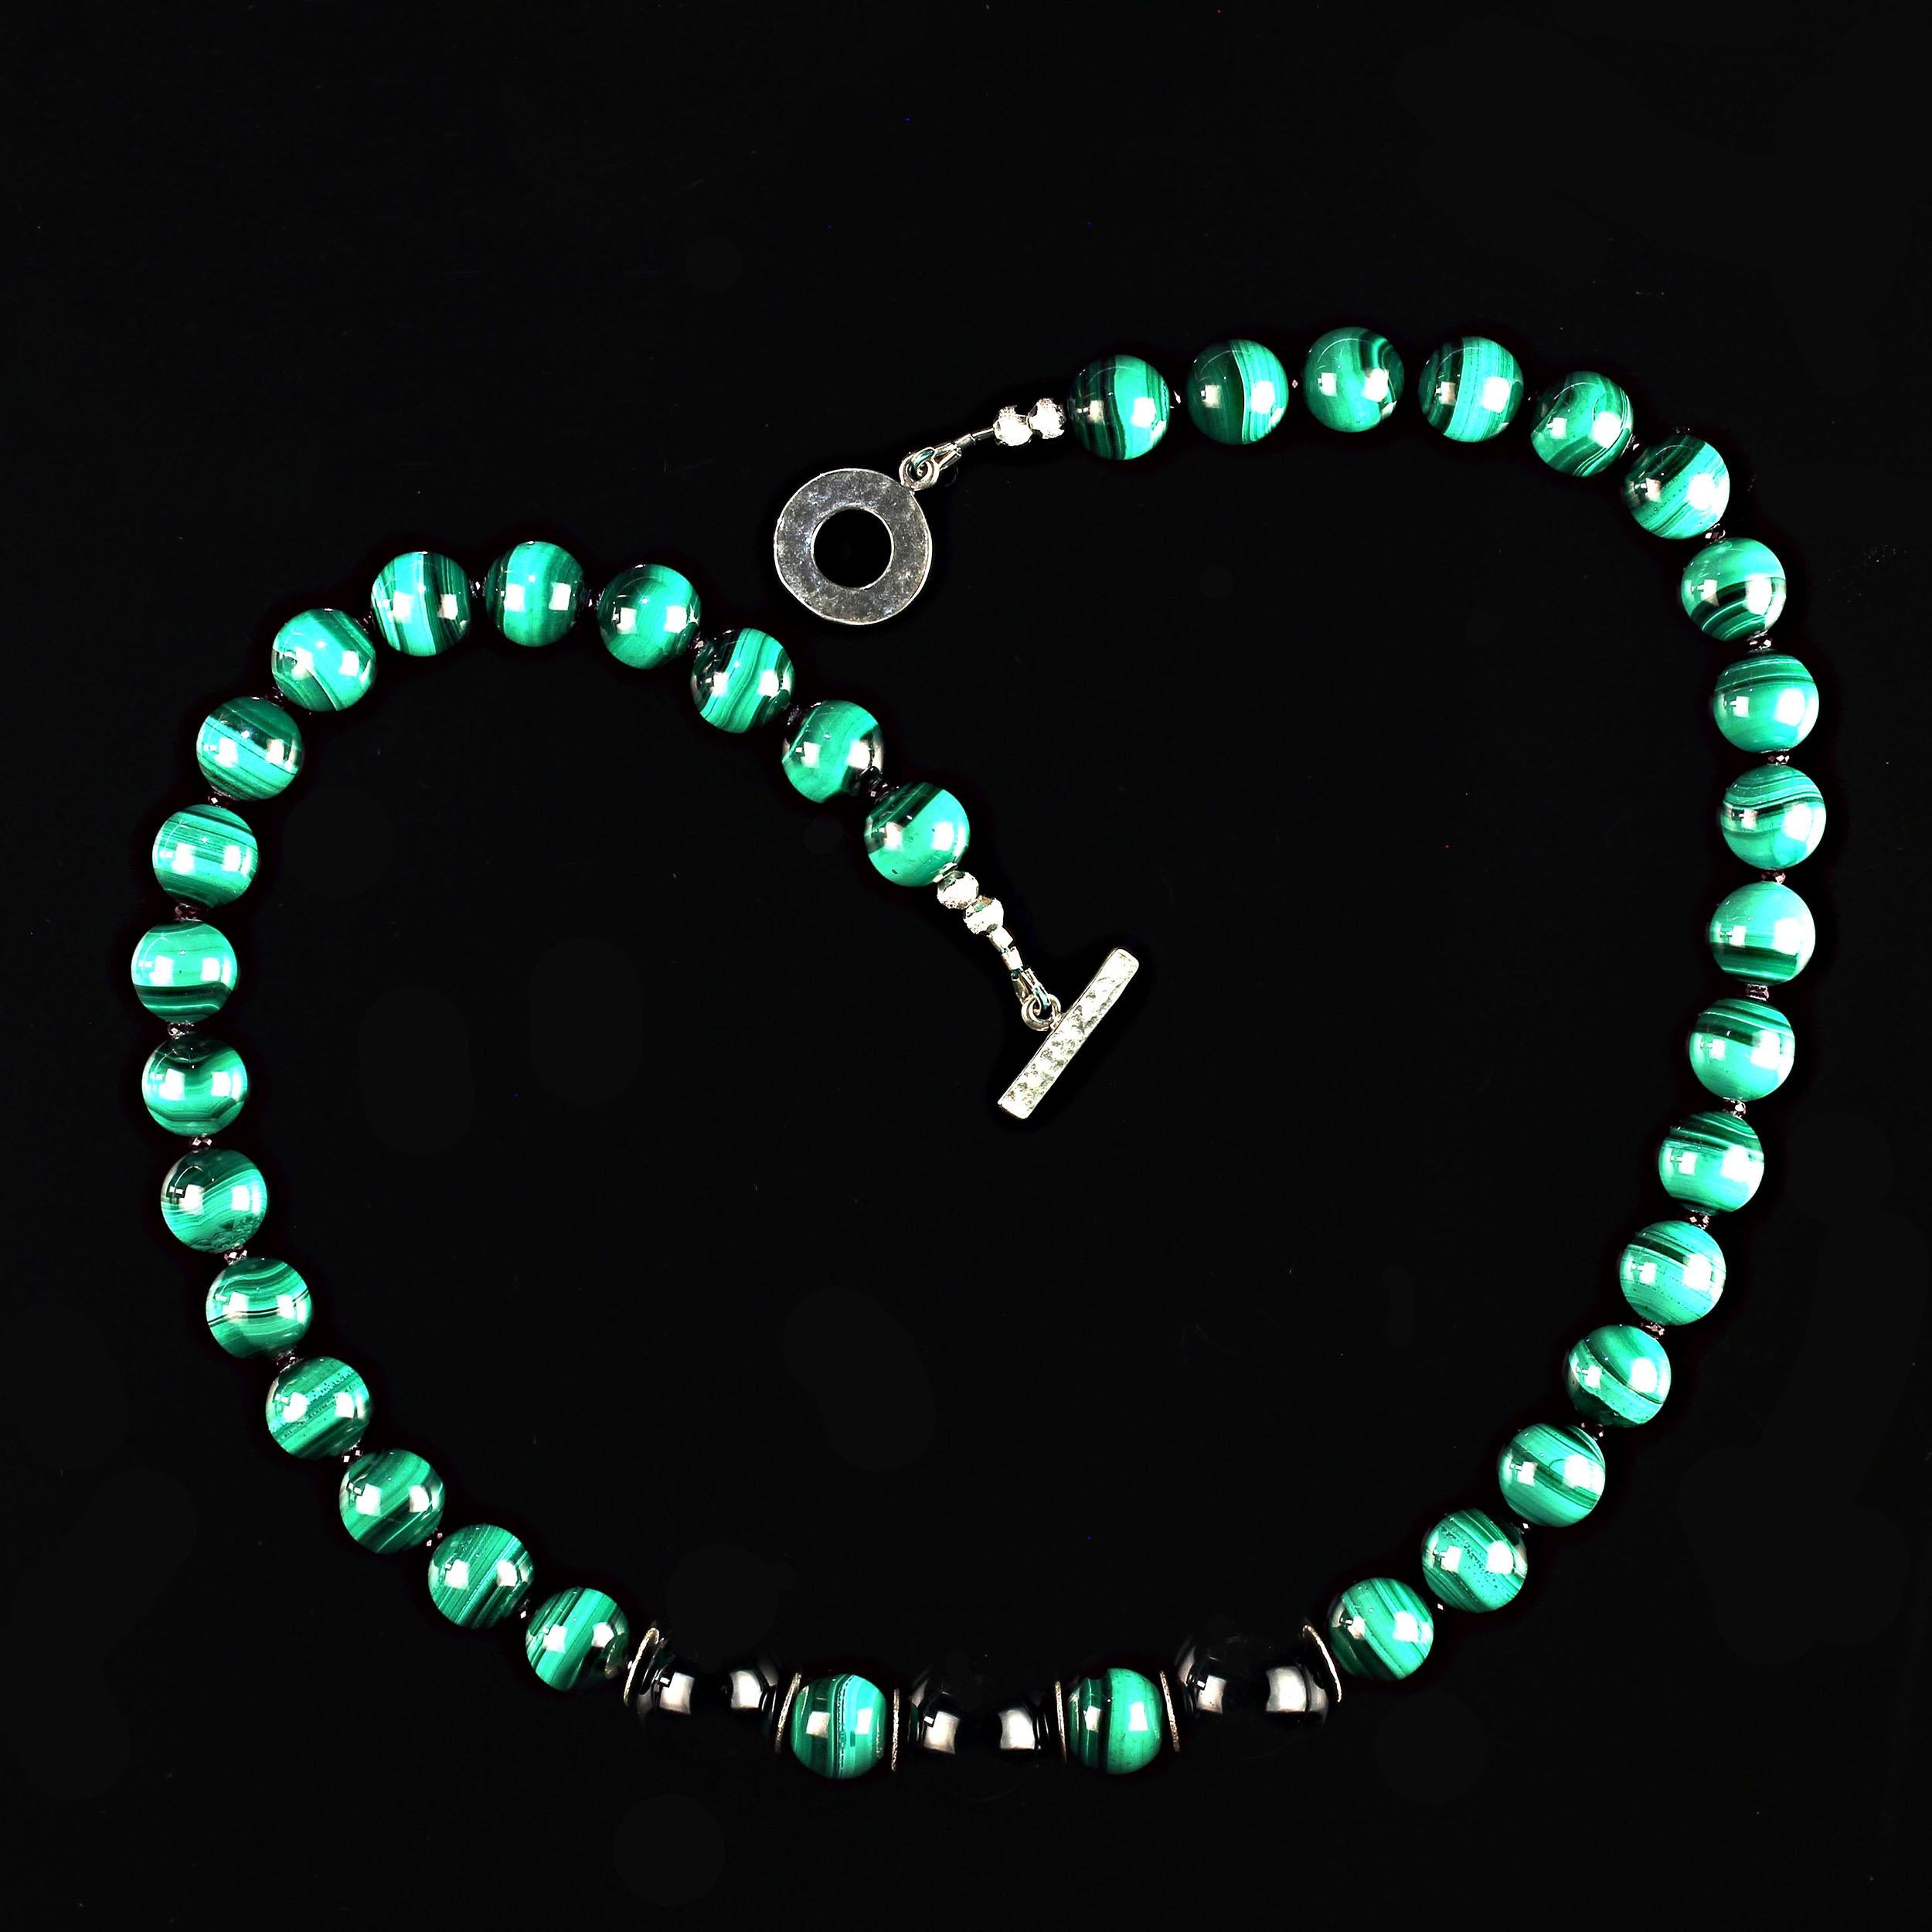 Bead AJD Magnificent Malachite 20 inch necklace with Spinel and Onyx  Great Gift! For Sale